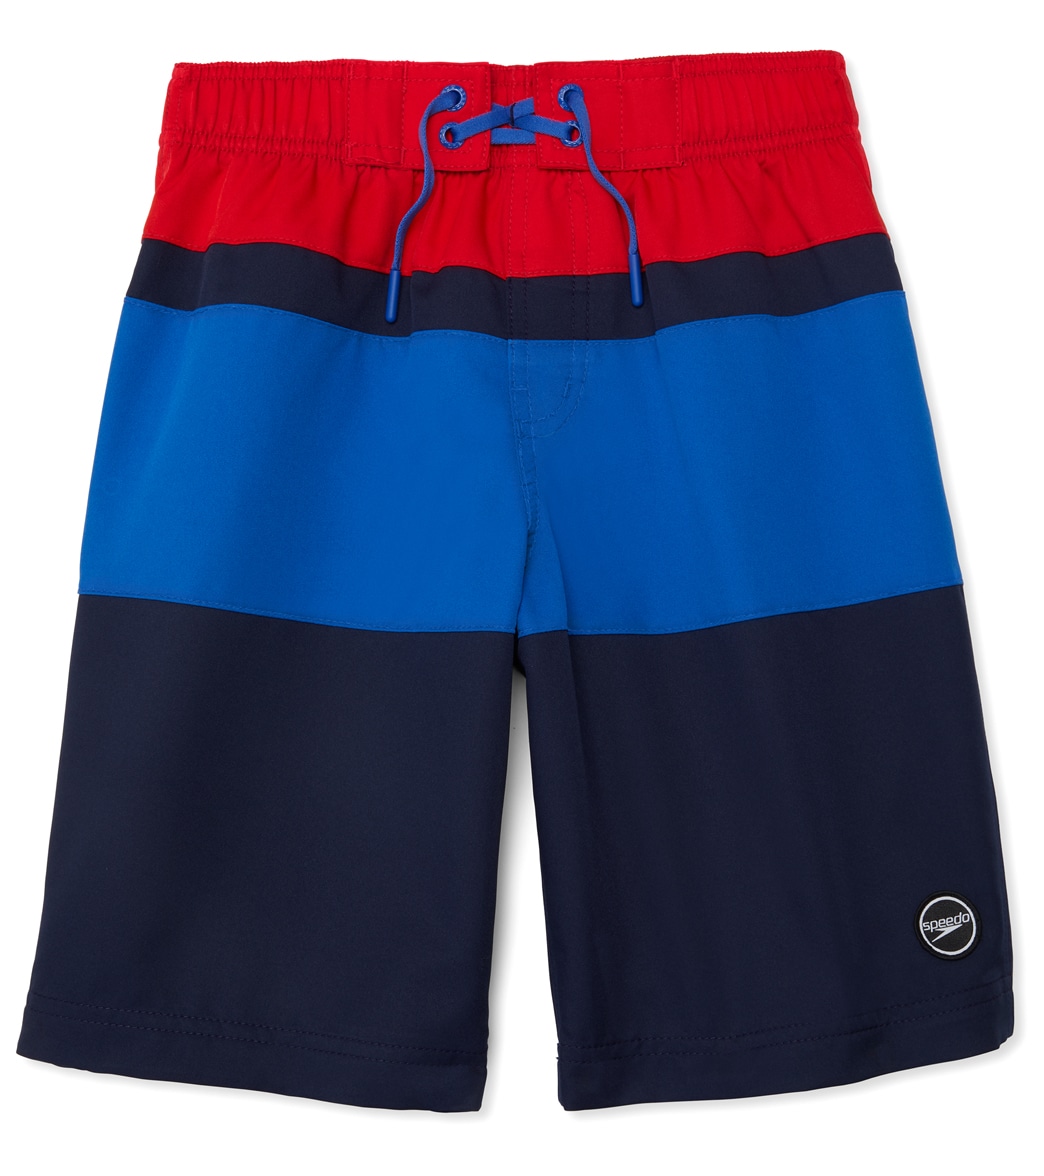 Speedo Boys' Color Blocked 17 Boardshorts Big Kid - Peacoat Xs Size X-Small Polyester - Swimoutlet.com